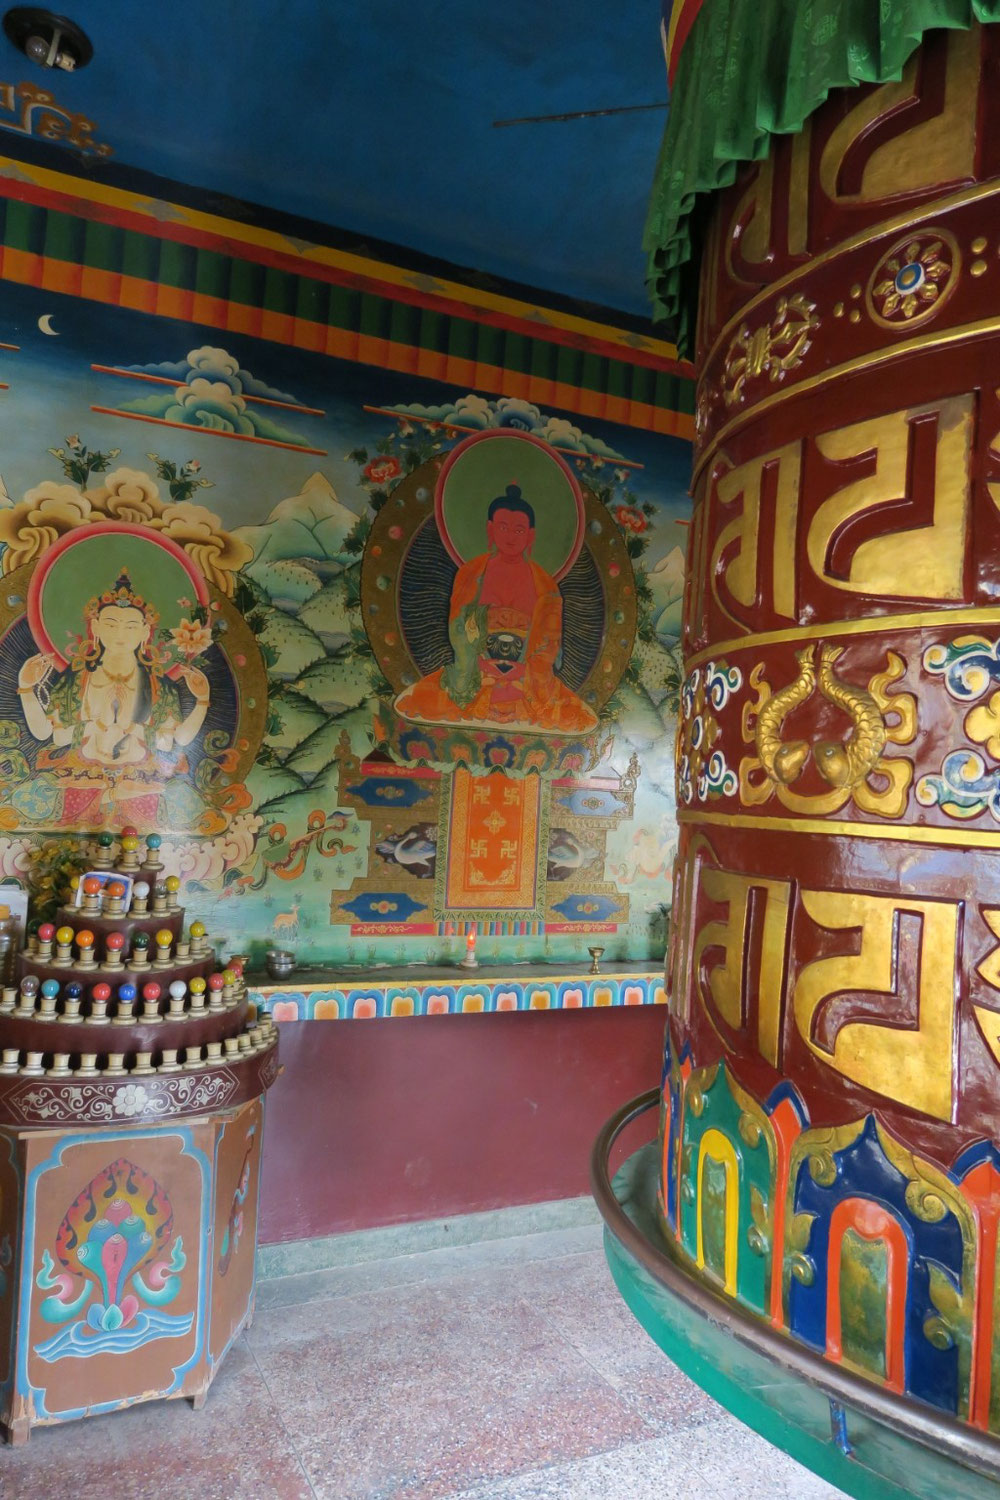 Really Large Prayer Wheel on the Right